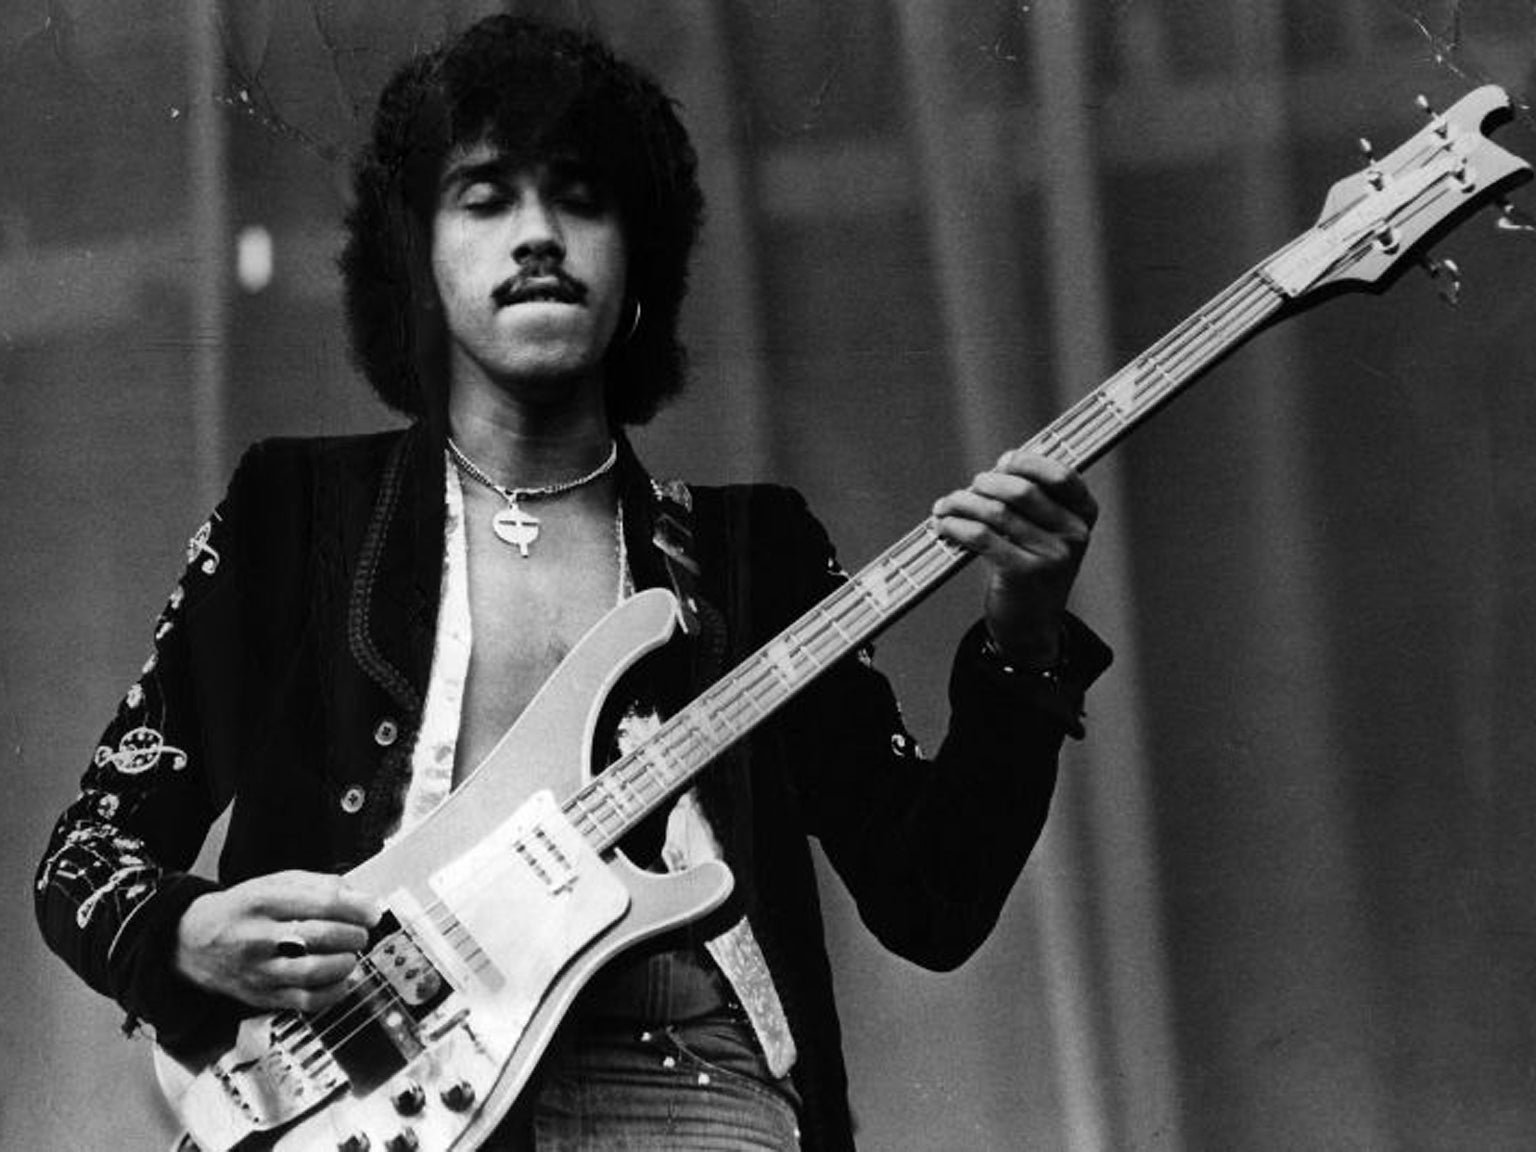 Phil Lynott (1951 - 1986) on stage with Thin Lizzy